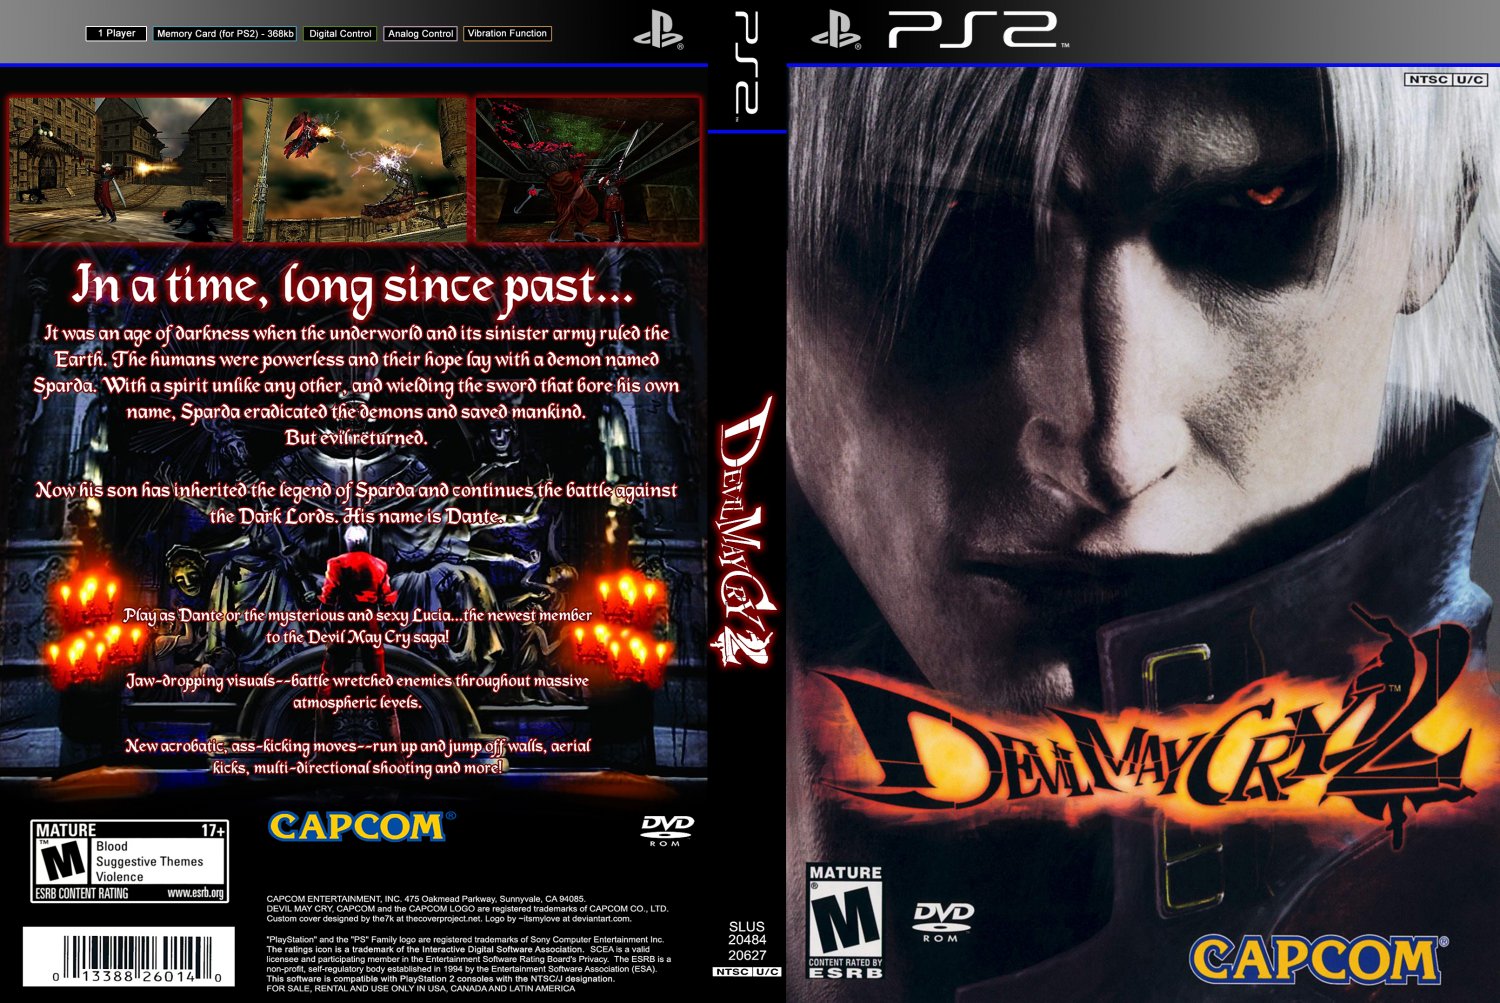 devil-may-cry-2-playstation-game-covers-devil-may-cry-2-dvd-covers